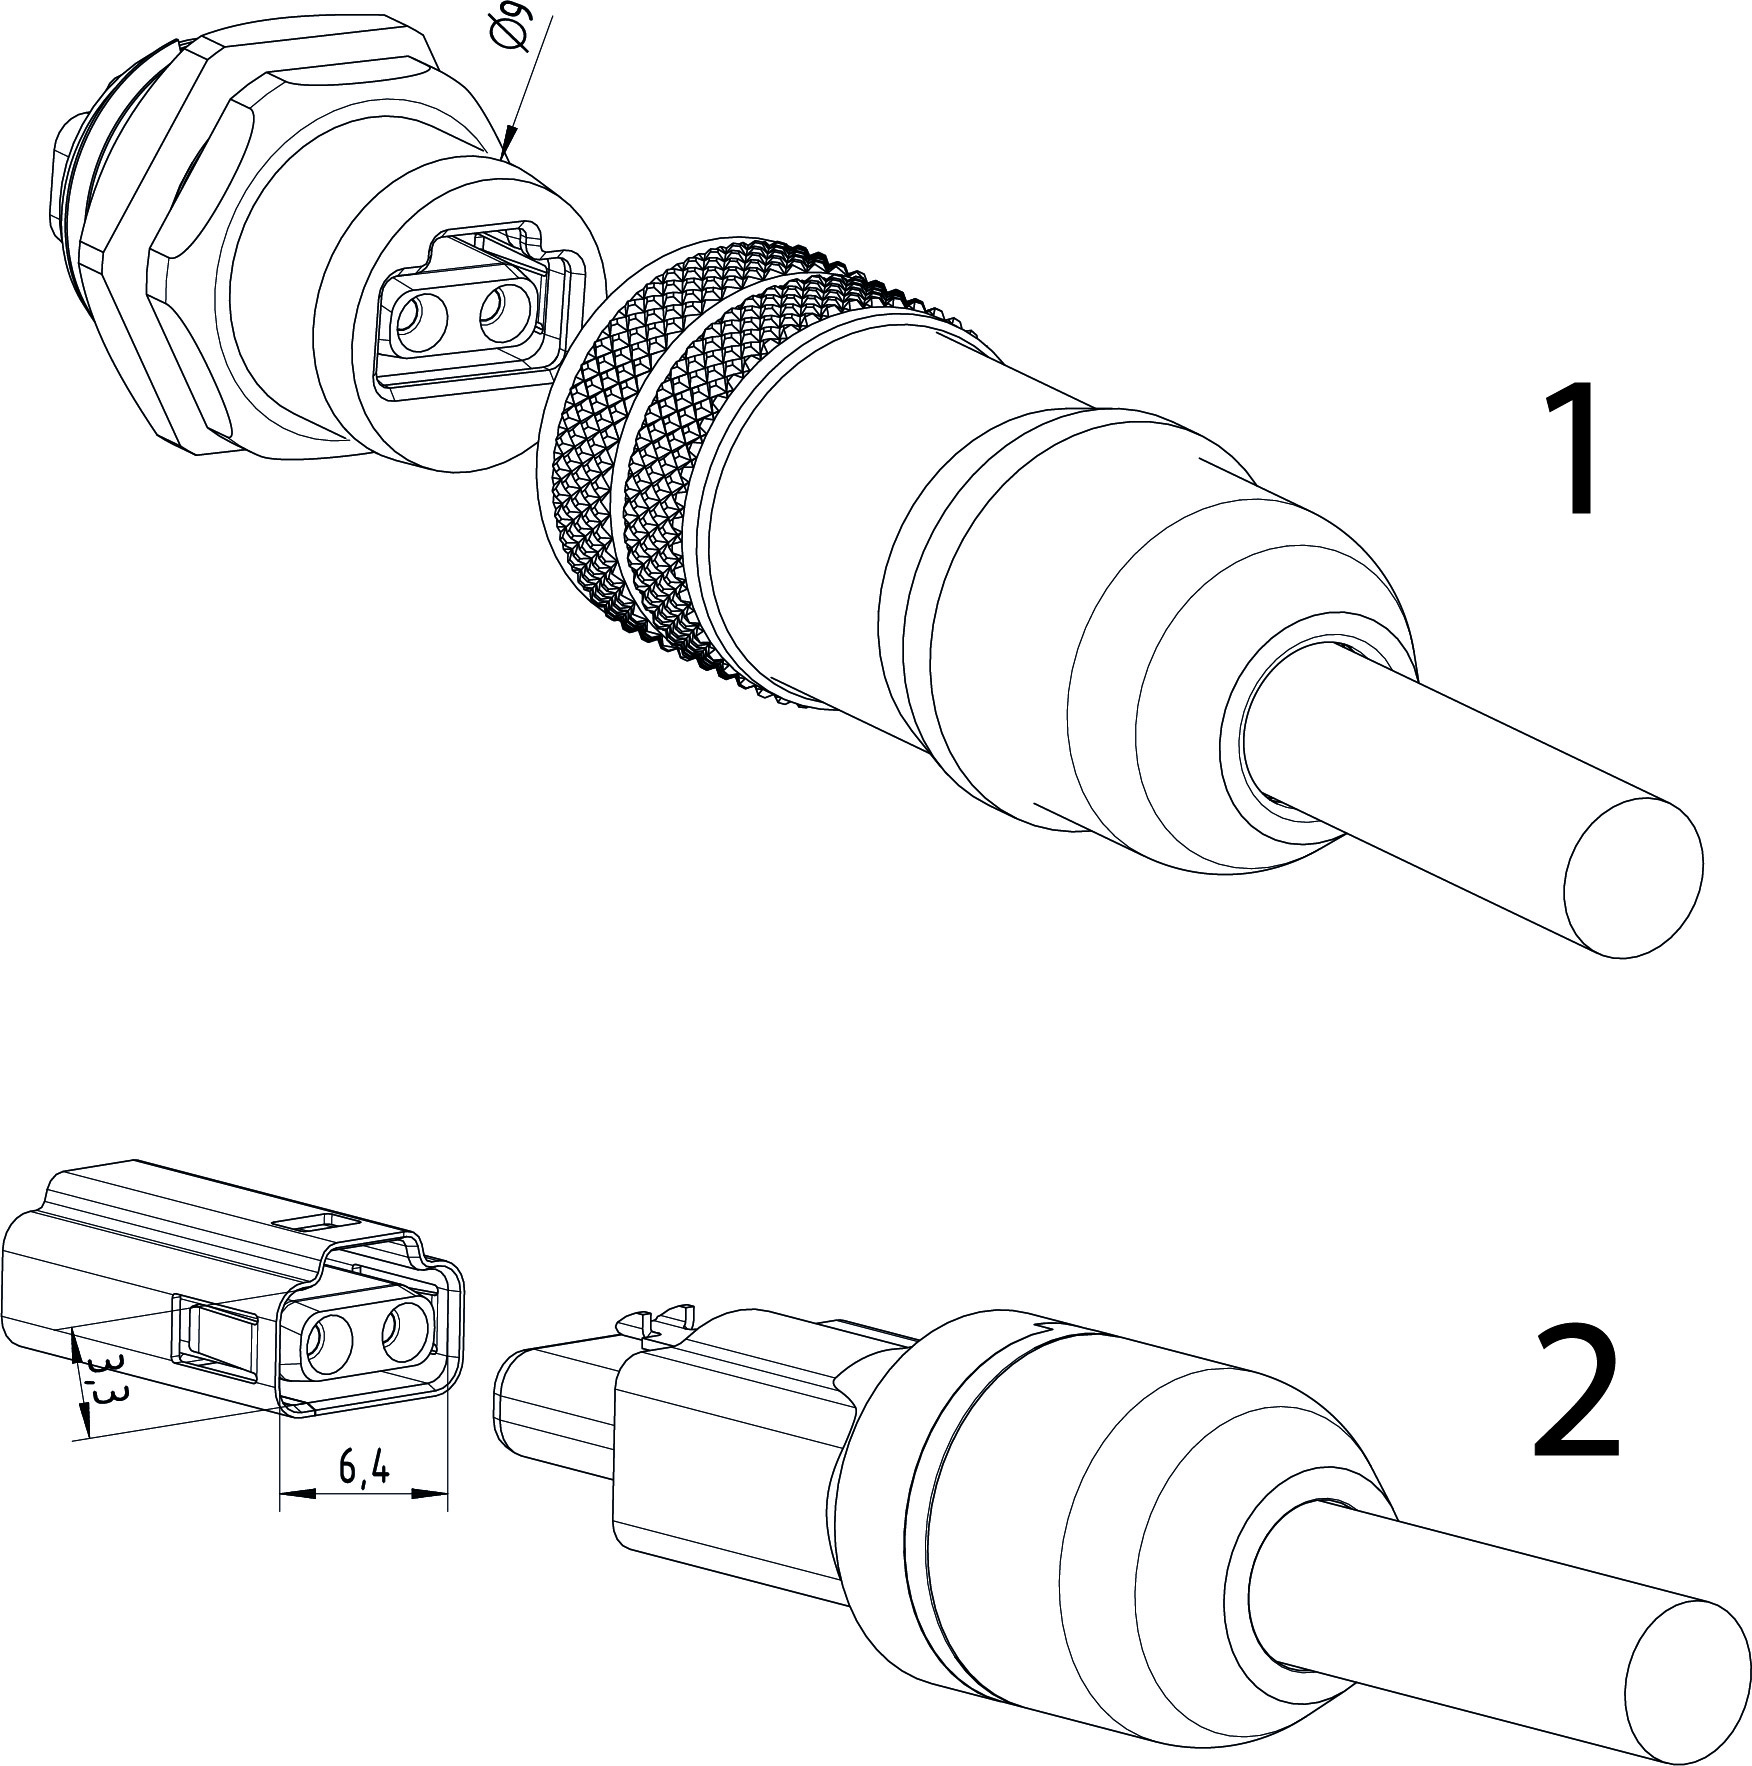 IP20 and IP67 T1 connector design for single-pair Ethernet